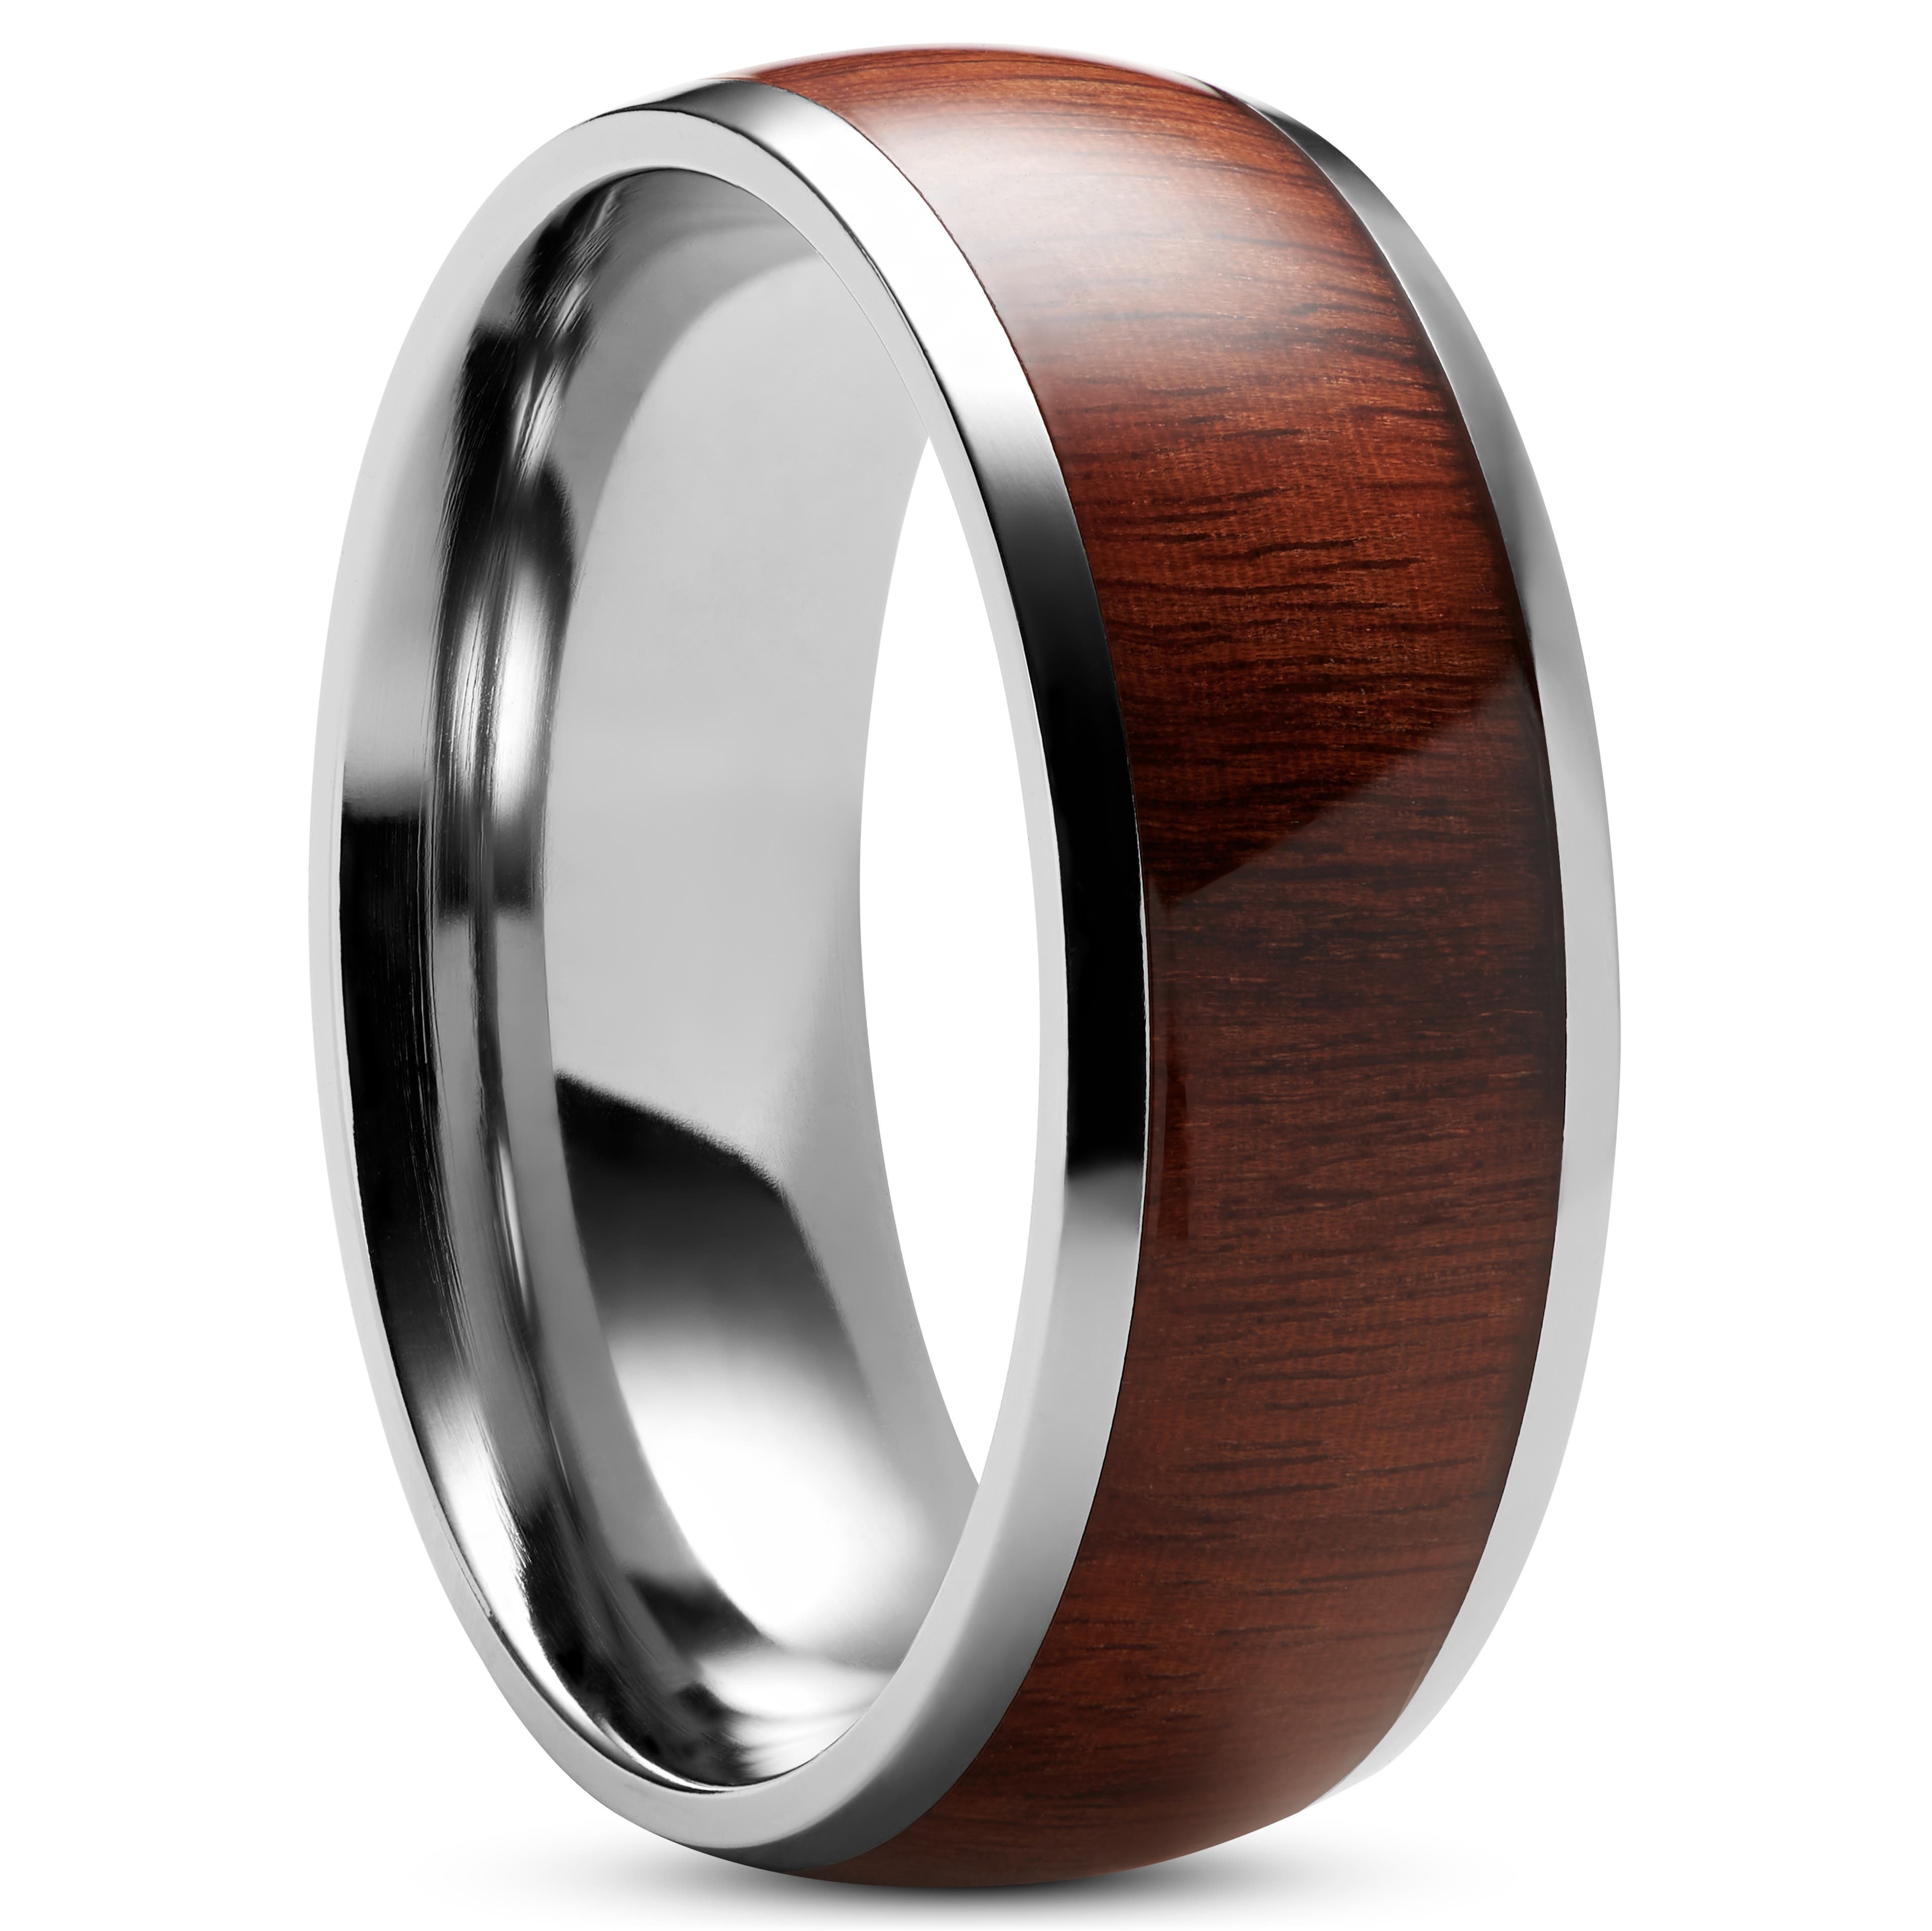 Aesop | 8 mm Silver-Tone Titanium With Natural Red Oak Center Ring